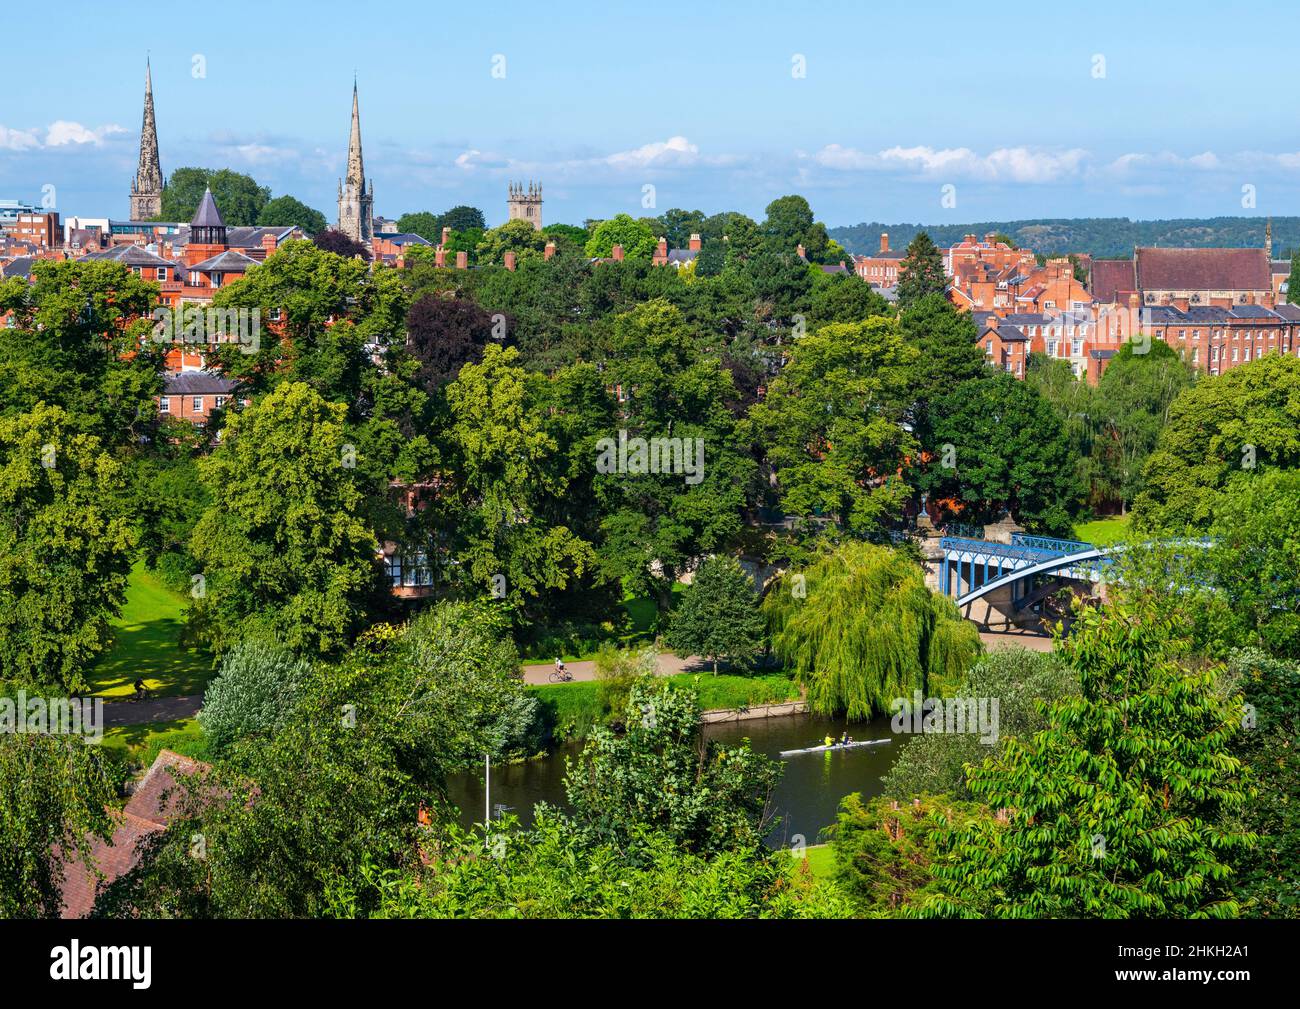 Looking down on the Quarry and the River Severn in Shrewsbury, Shropshire. Stock Photo